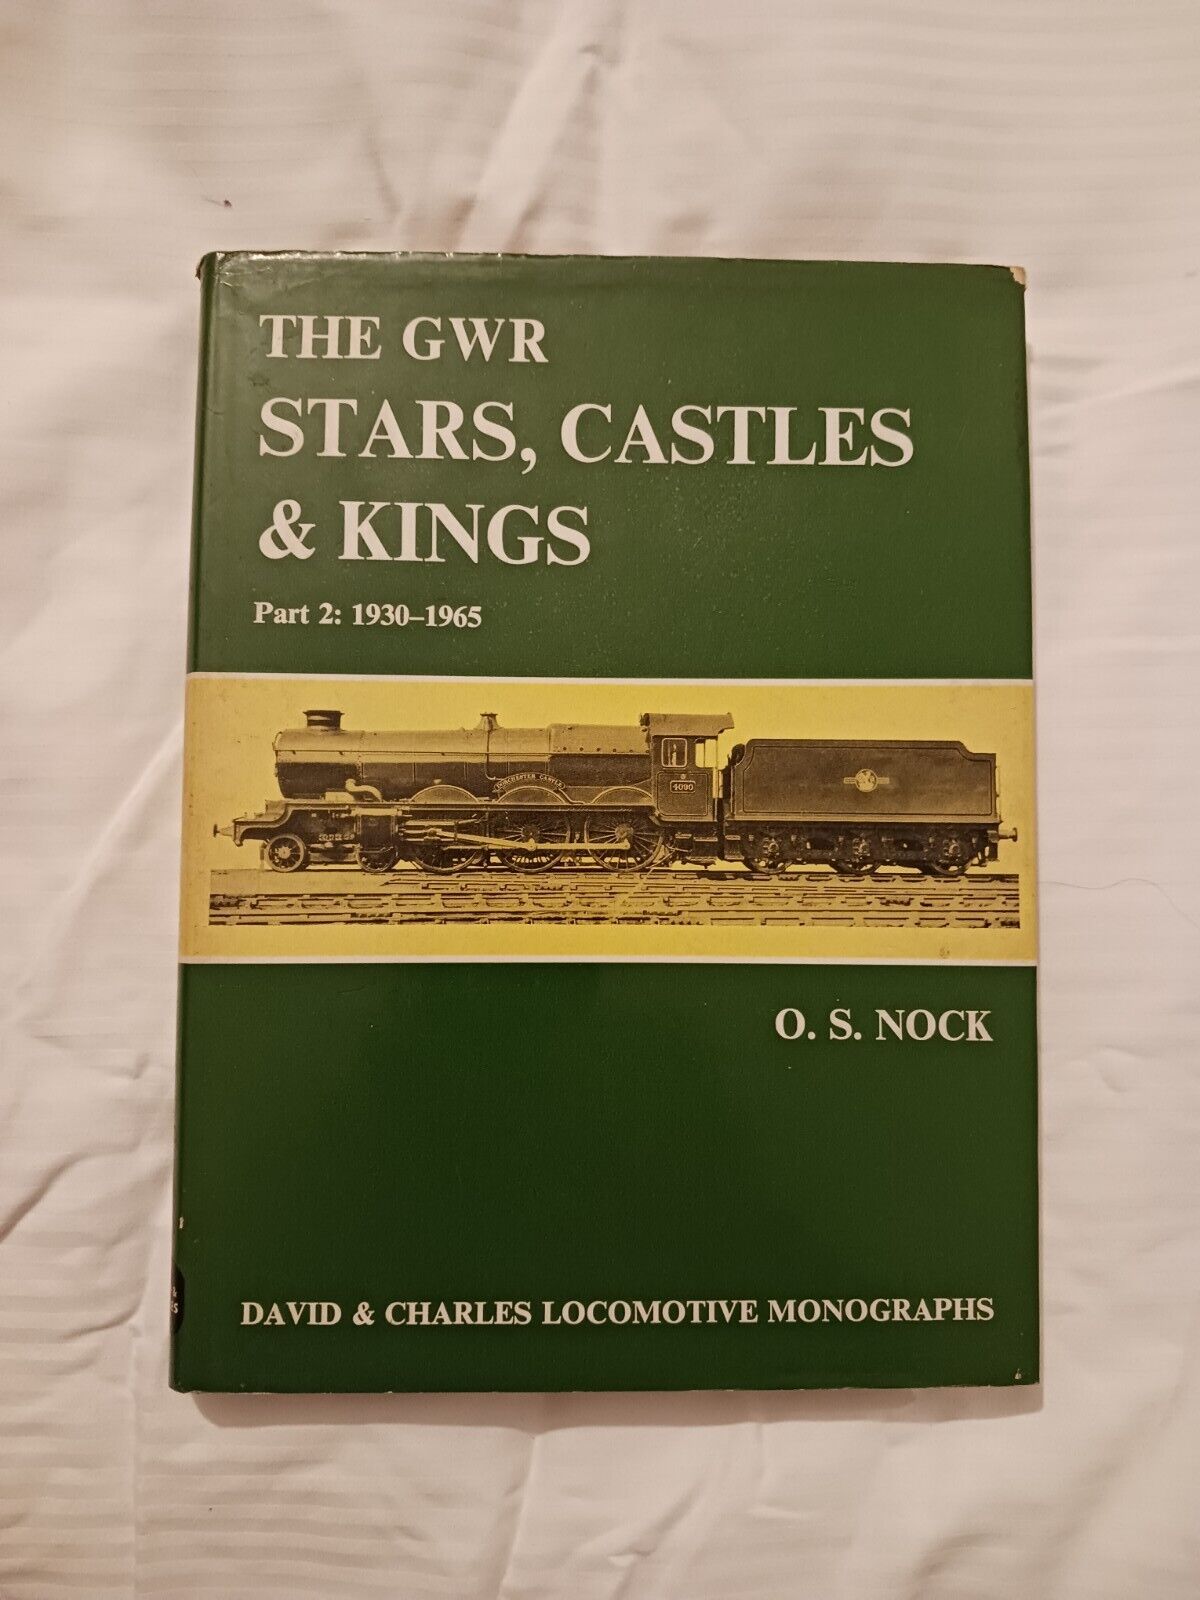 THE GWR STARS,CASTLES &KINGS-Part 2-1930-1965-O.S.Nock-1970.